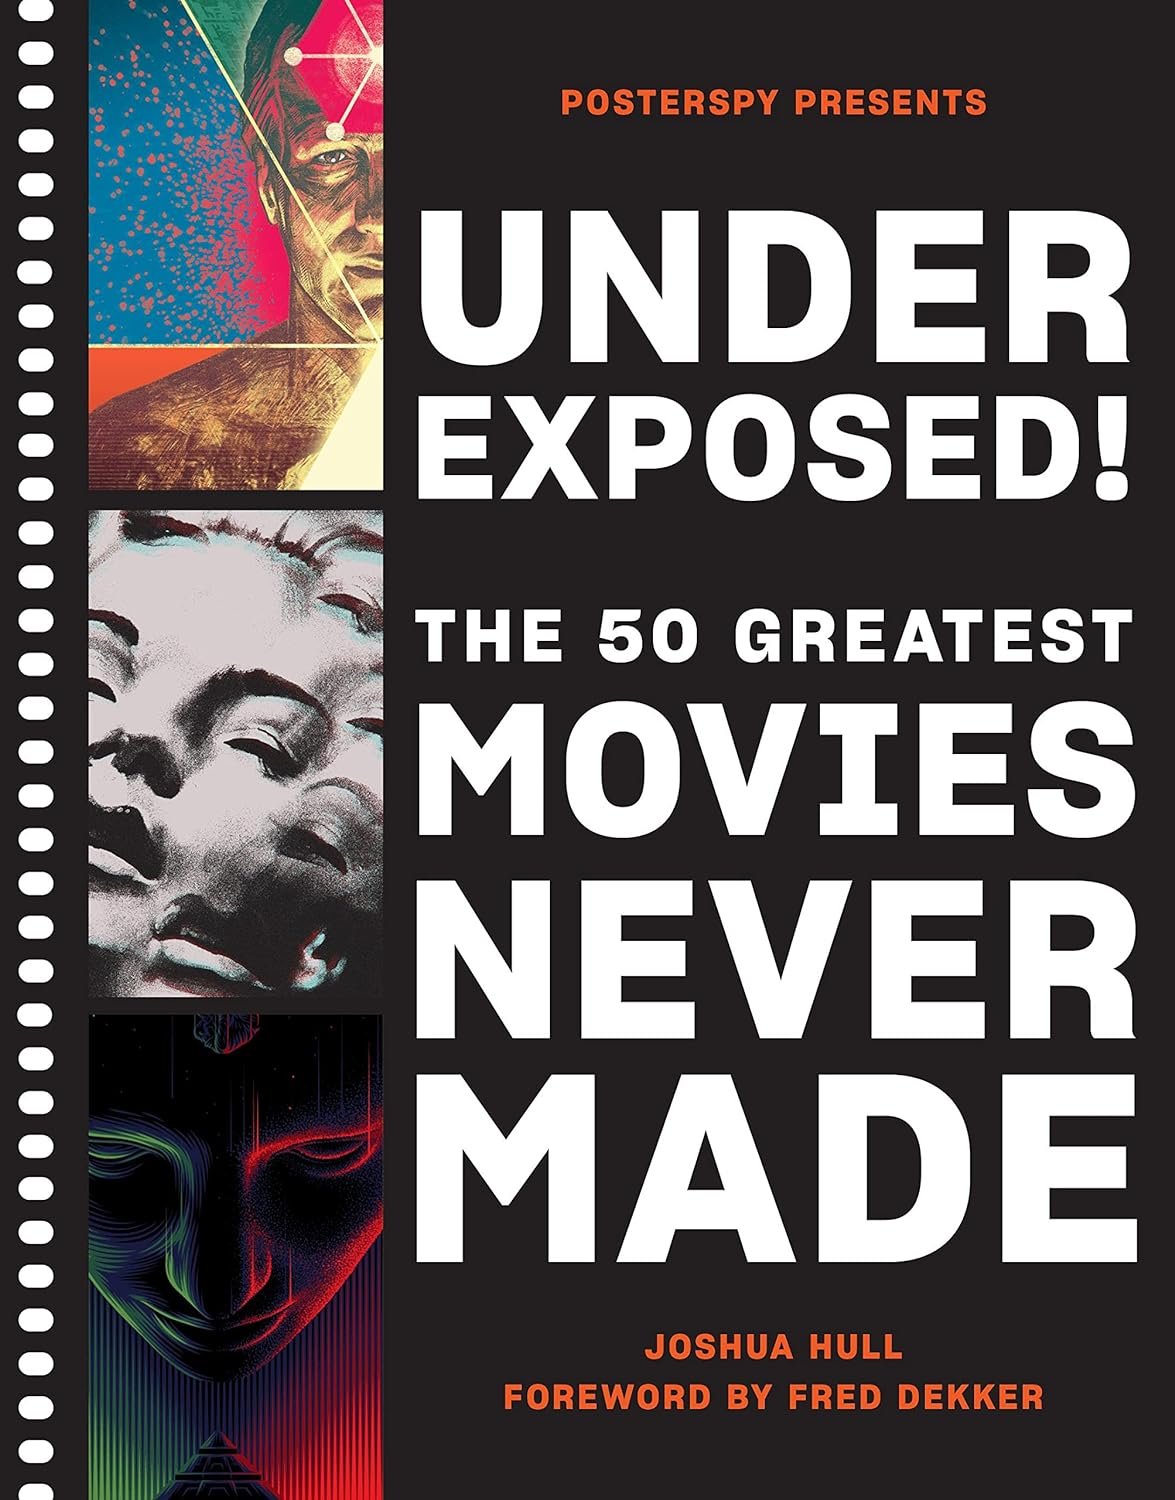 Underexposed!: The 50 Greatest Movies Never Made